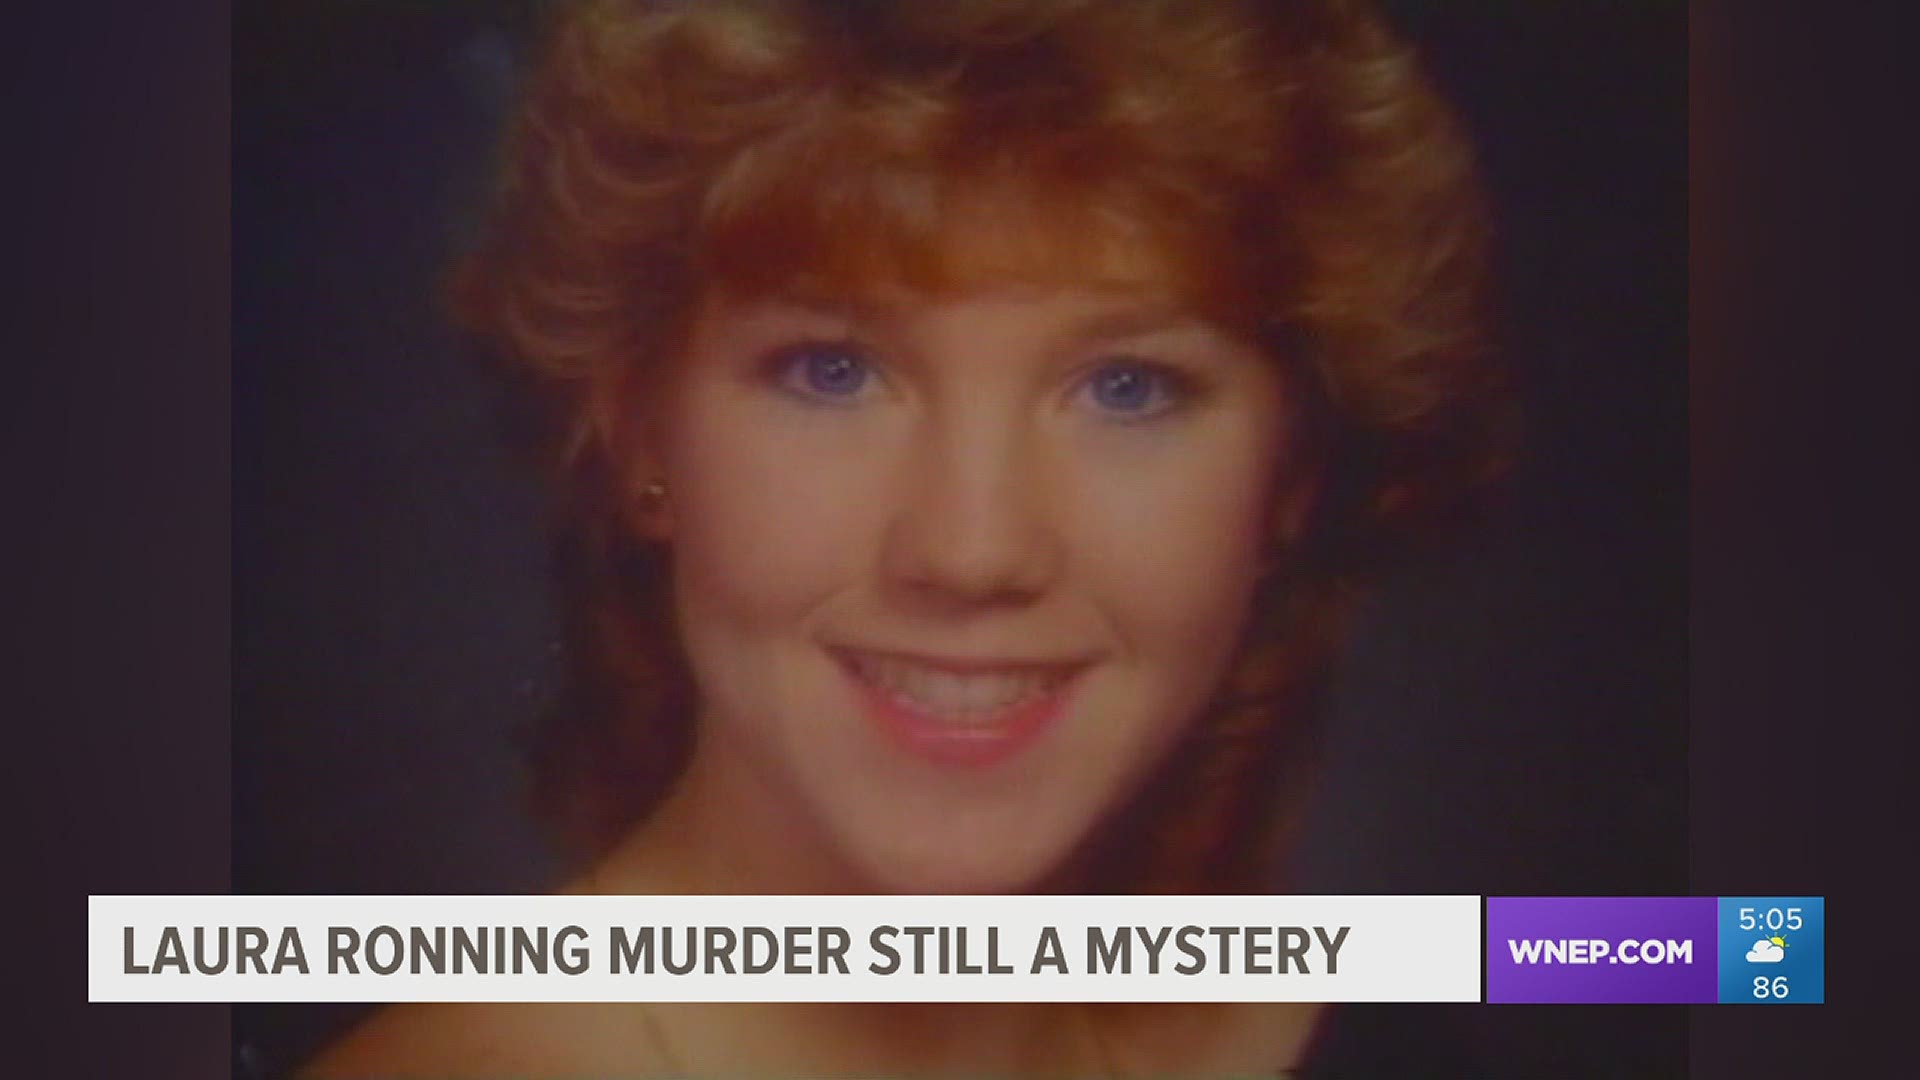 It's been 30 years since a woman was murdered in Wayne County and no one has been convicted in the case.